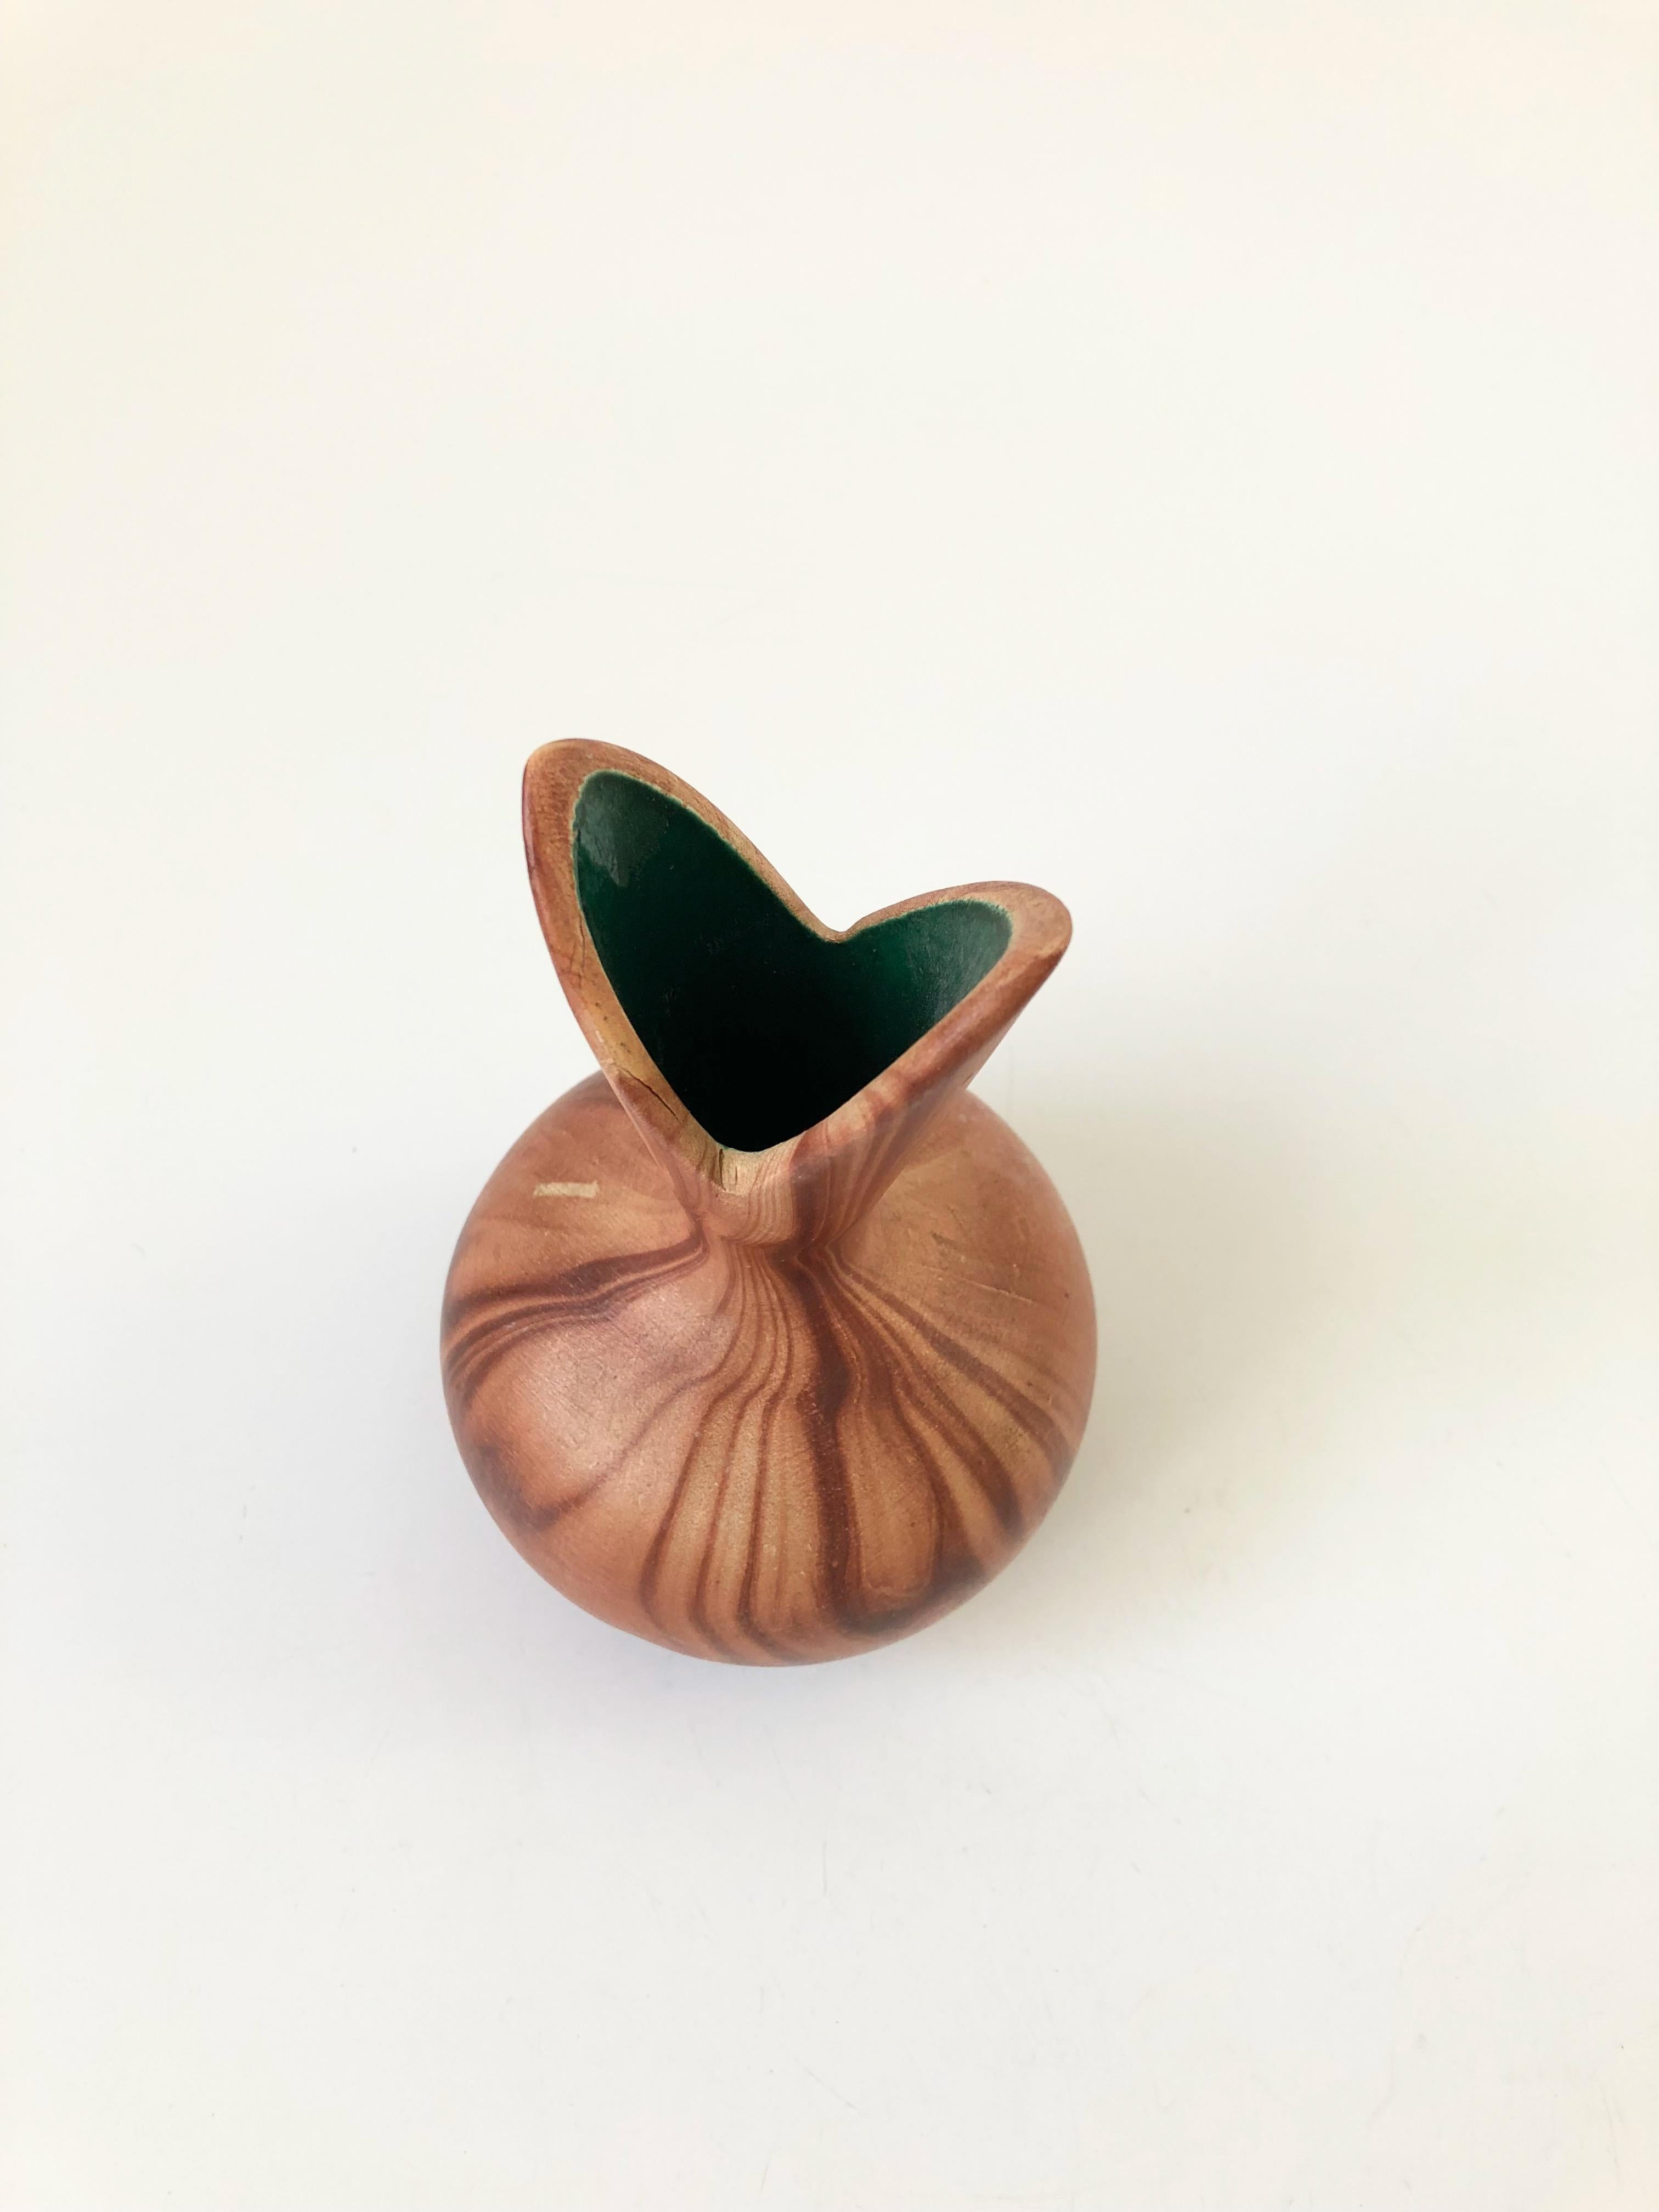 A beautiful vintage vase with a lovely terra cotta swirled pattern to the matte glaze. The interior is glossy and non absorbent, glazed in green, for a subtle pop of color. Made by Romco, Rocky Mountain Pottery Company of Colorado.
 